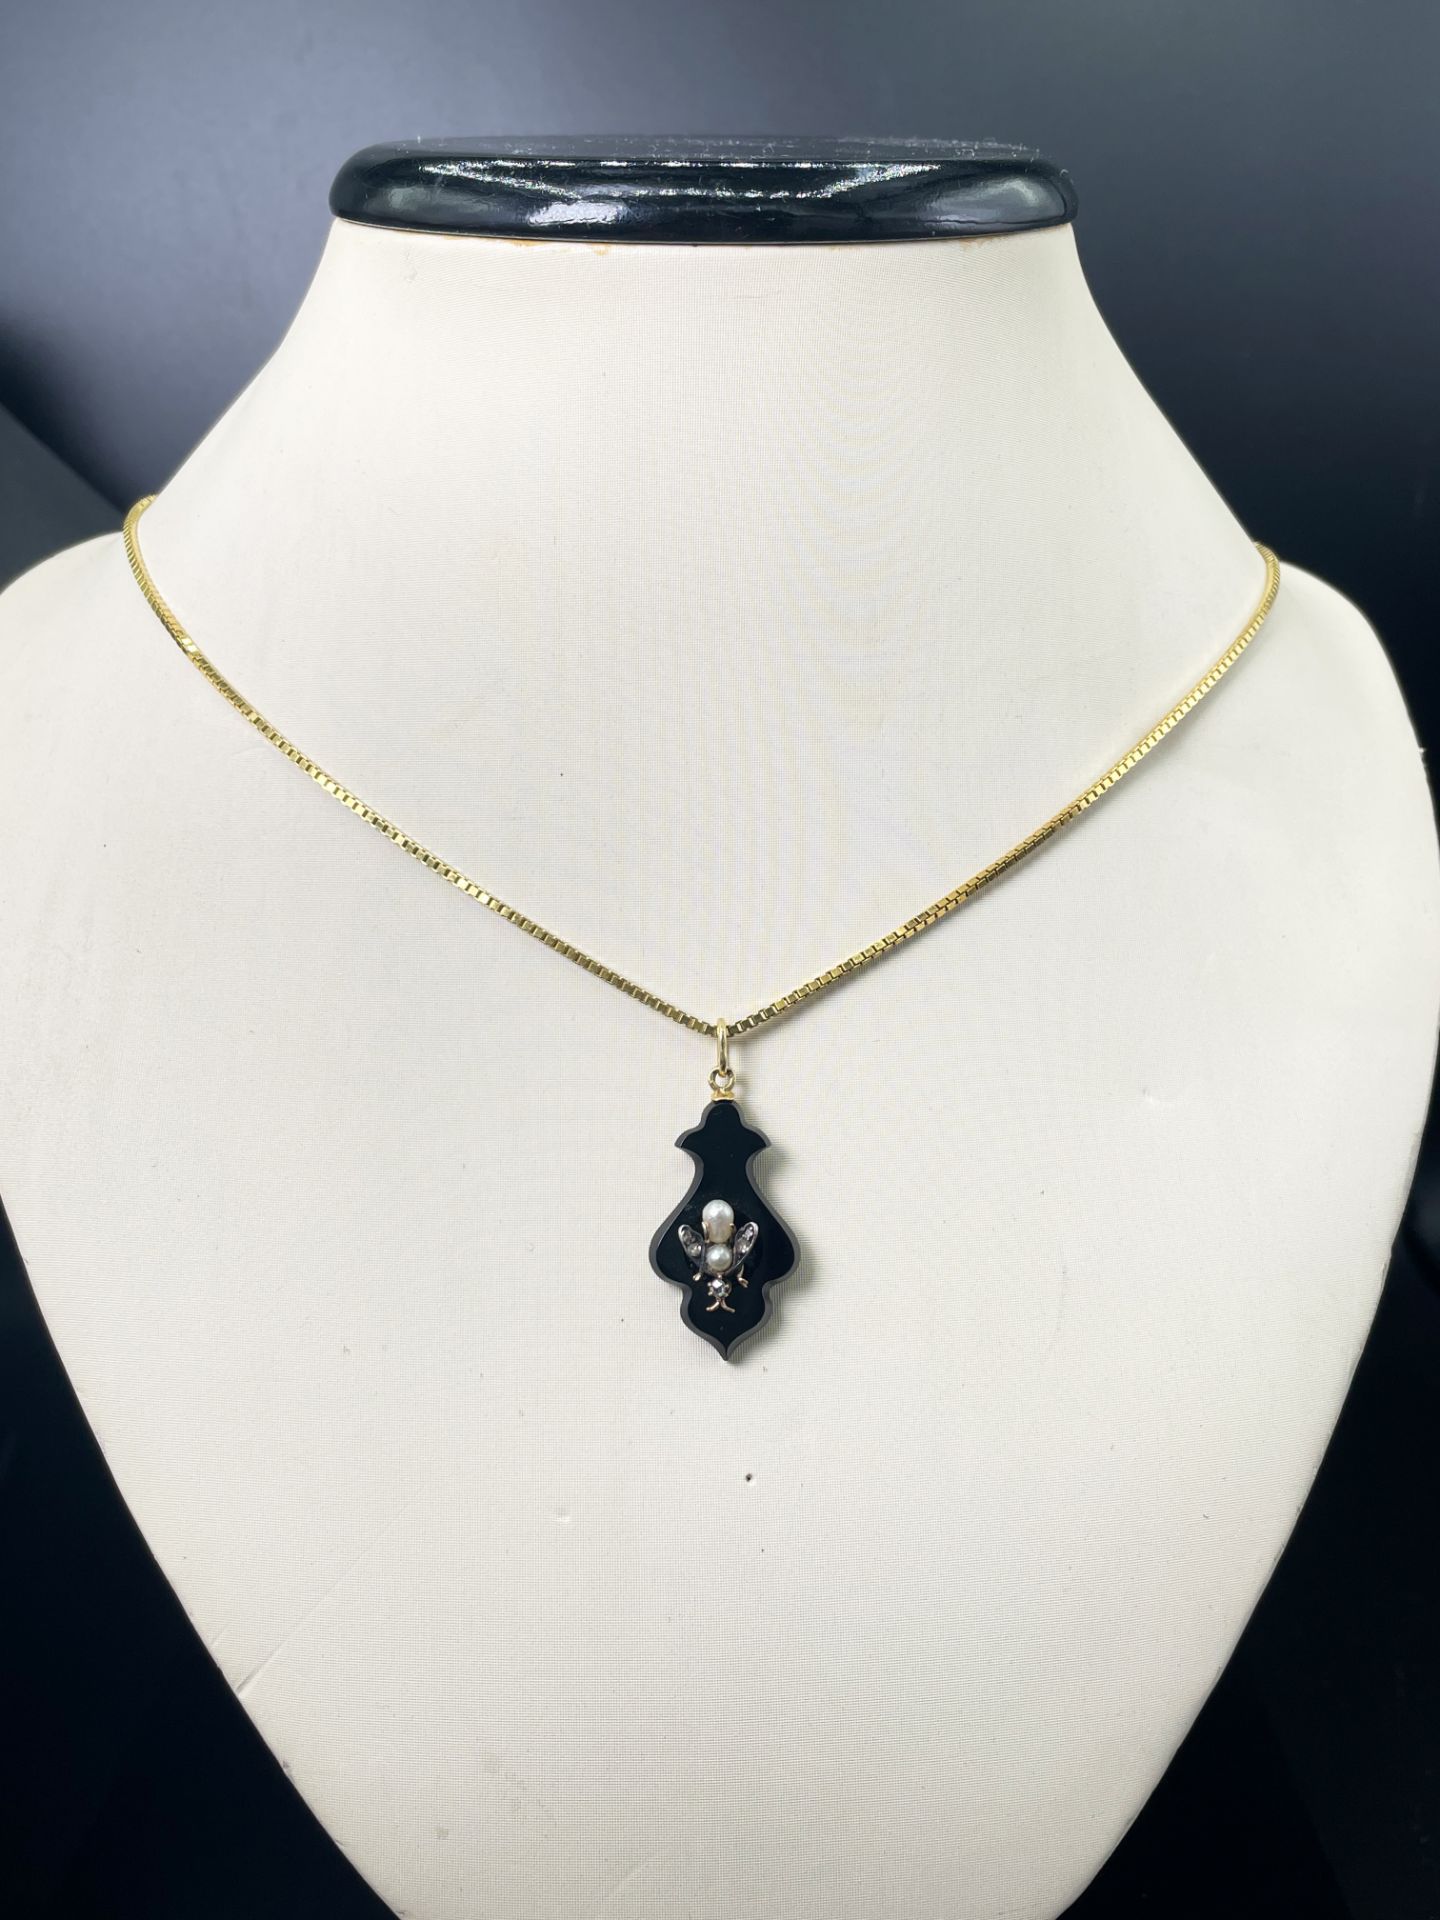 Antique onyx pendant, with 14K gold insect, pearls and diamonds - Image 2 of 5